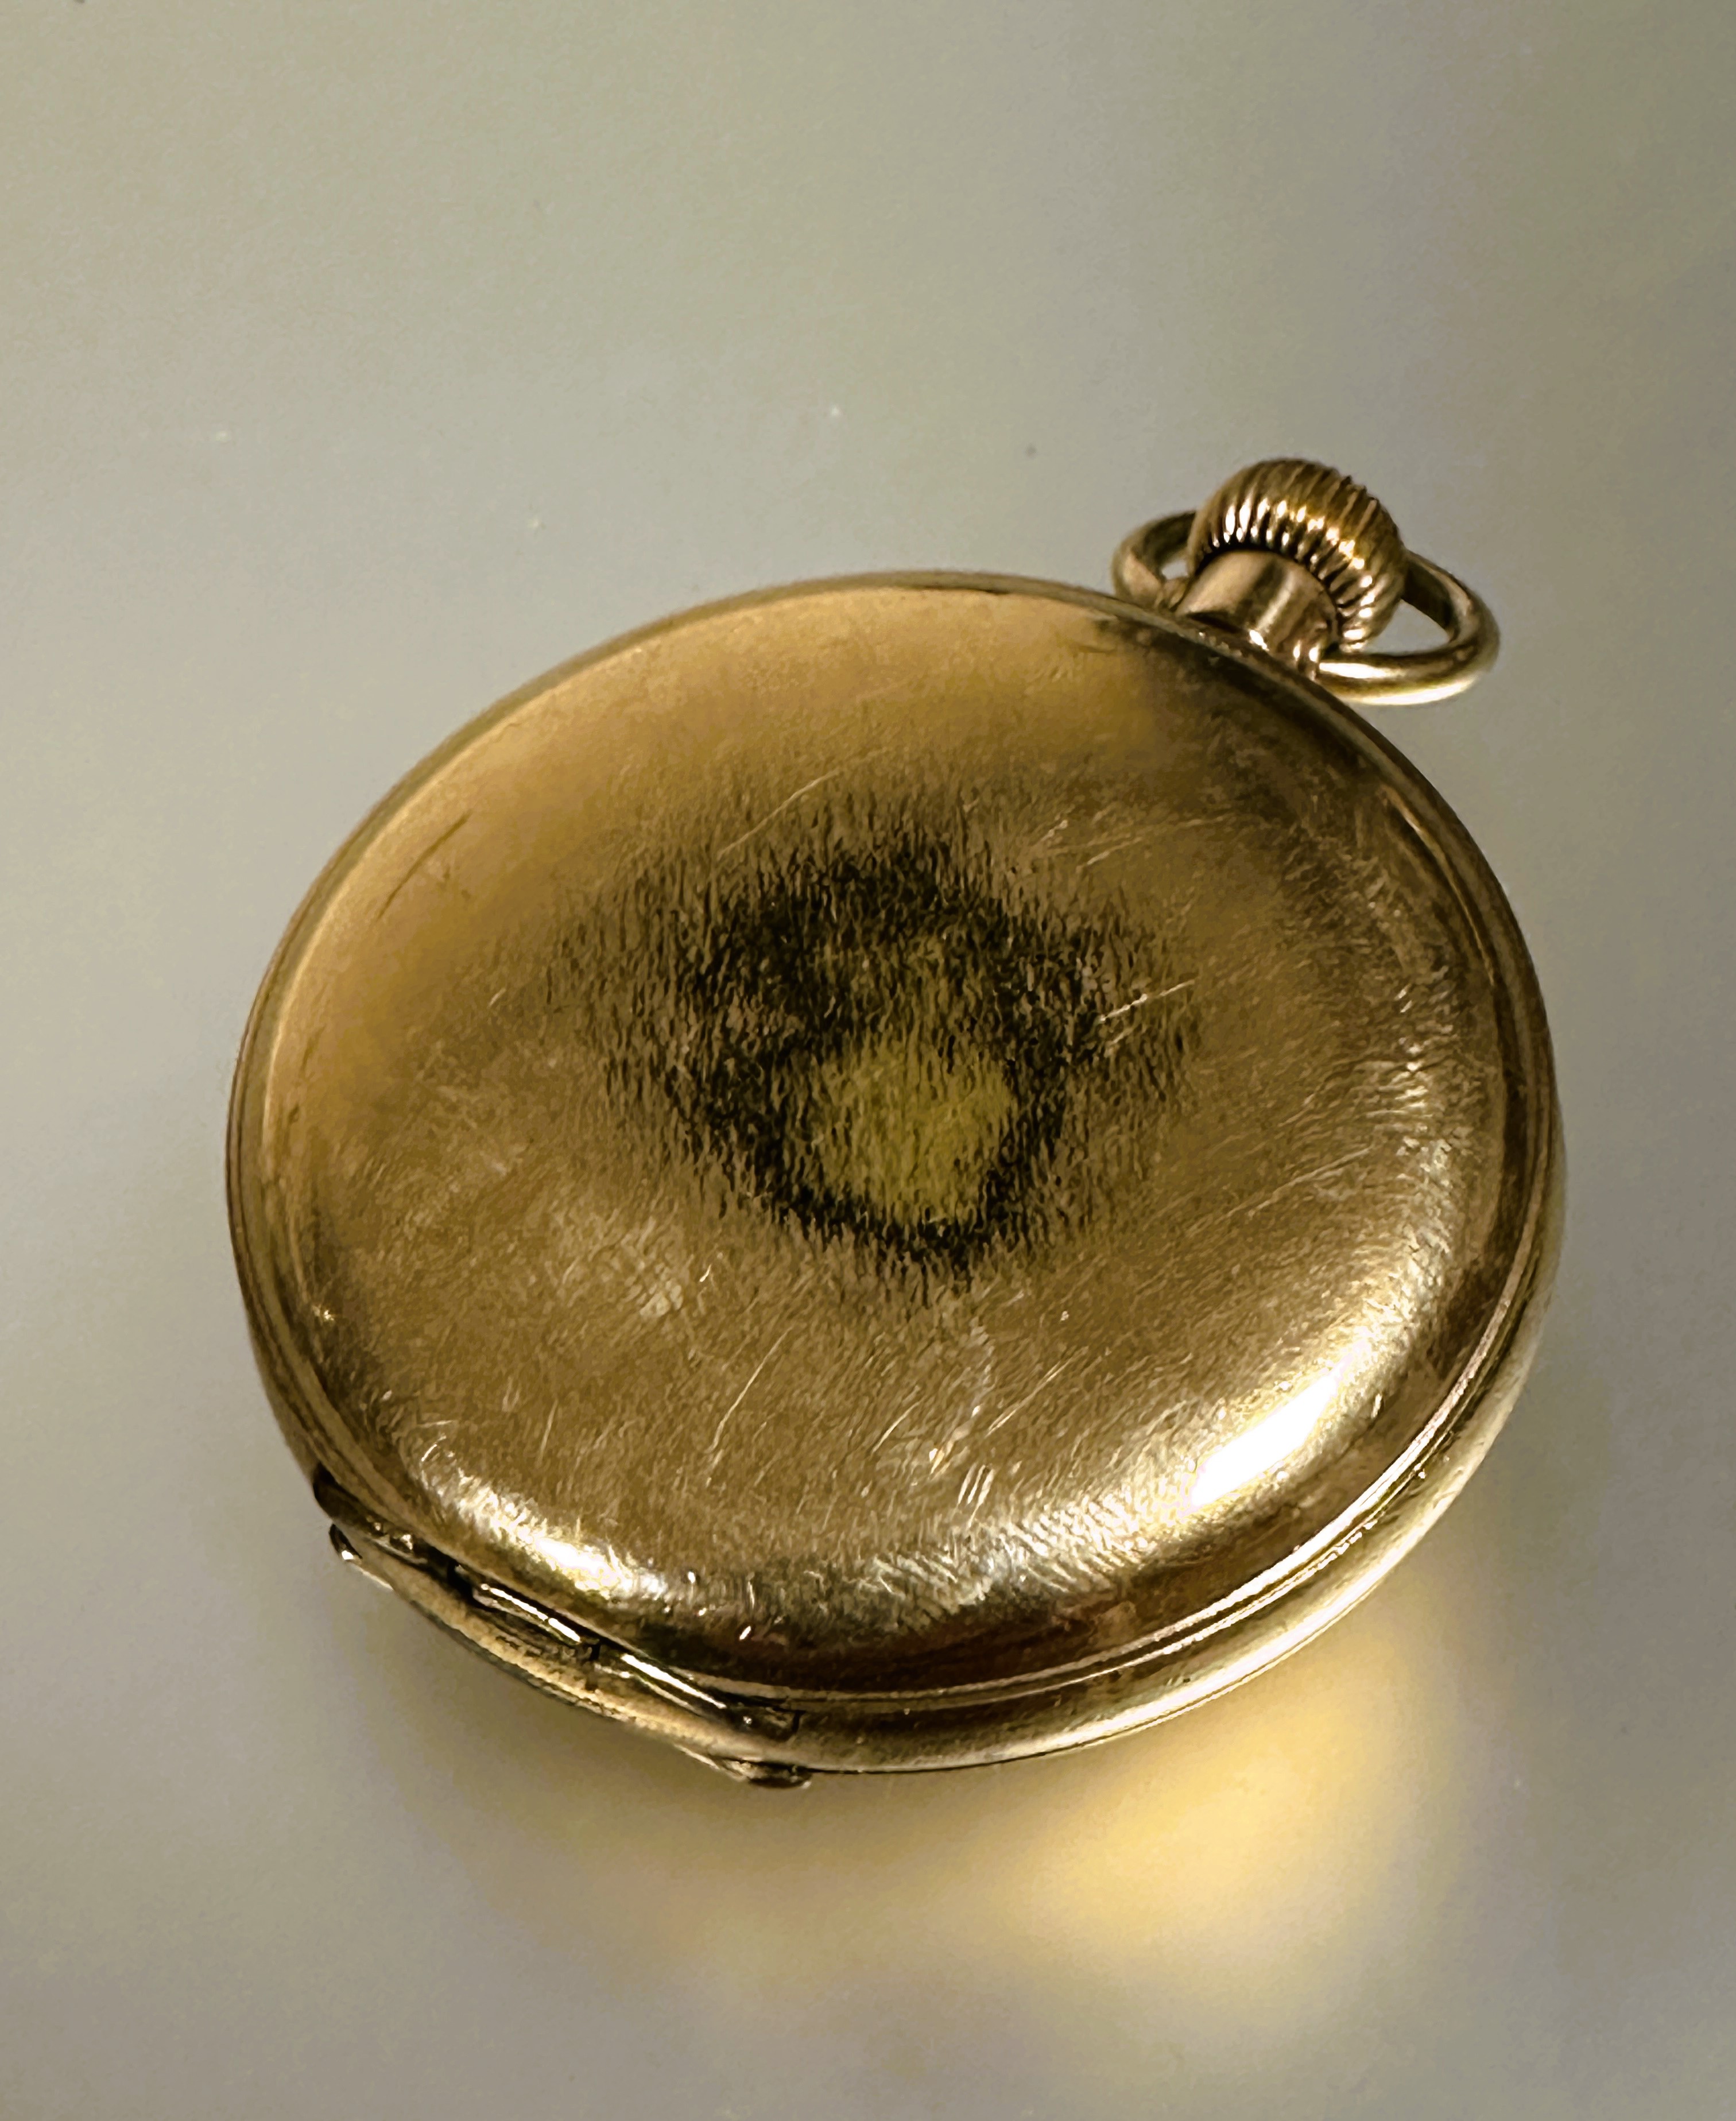 An American Elgin gold plated full hunter pocket watch with enamel dial and roman numerals working D - Image 2 of 3